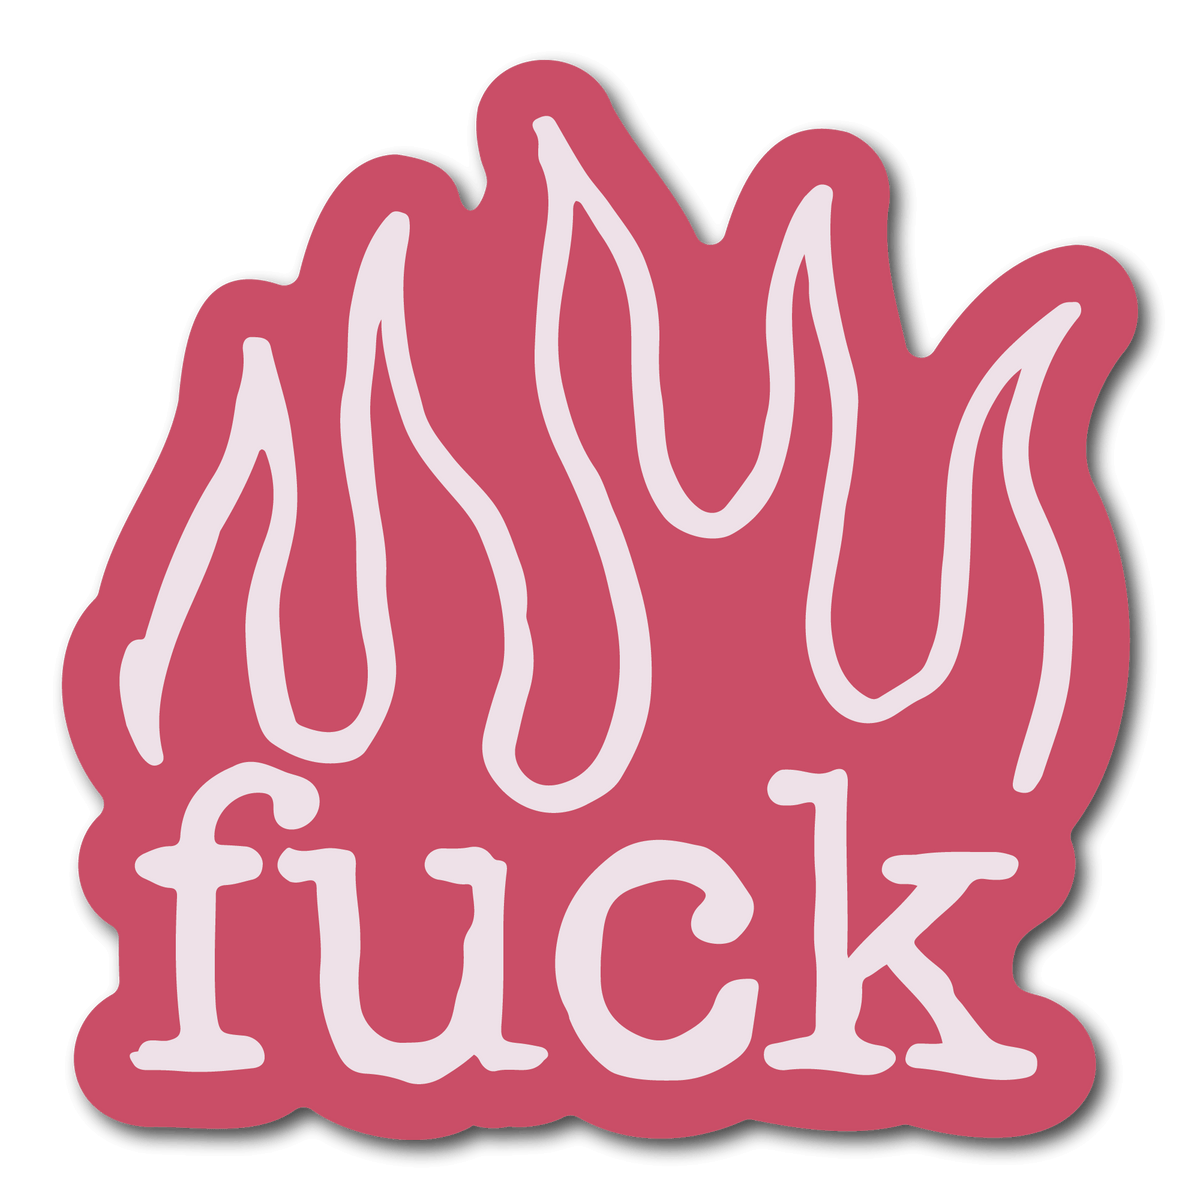 Small Pink Sticker that says fuck with flames over it